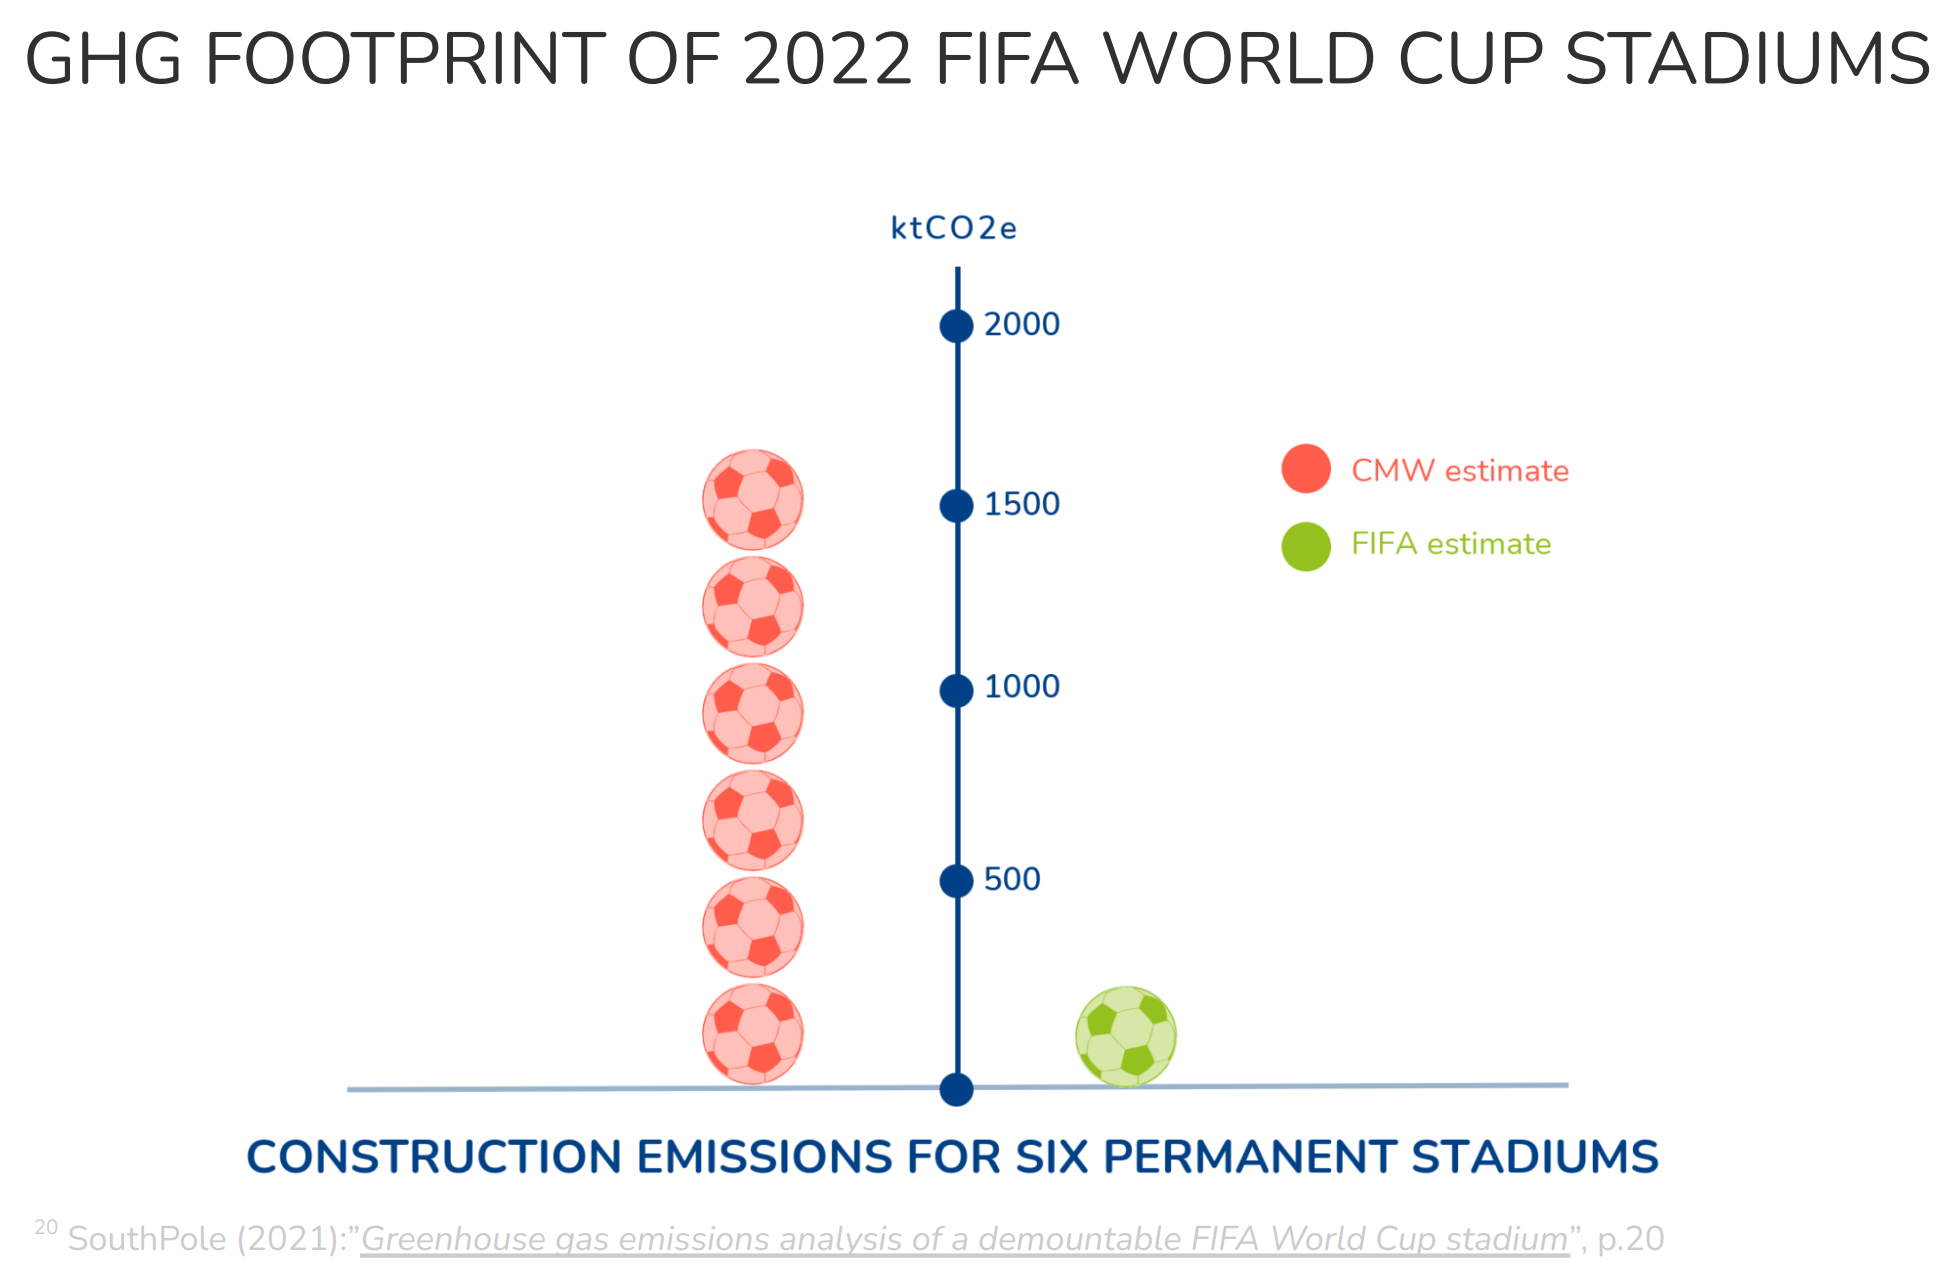 Greenhouse gas footprint of 2022 FIFA World Cup stadiums estimated by Carbon Market Watch (left, in red) and FIFA (right, in green). Adding the footprint of the temporary stadium, the total footprint for the construction of the seven new stadiums for 2022 World Cup is more likely to be at least 2.06MtCO2e. This makes the infrastructure construction by far the biggest source of emissions for the 2022 World Cup, compared to only the third biggest as currently accounted for in the report. Data: SouthPole (2021): Greenhouse gas emissions analysis of a demountable FIFA World Cup stadium, p.20. Graphic: Carbon Market Watch